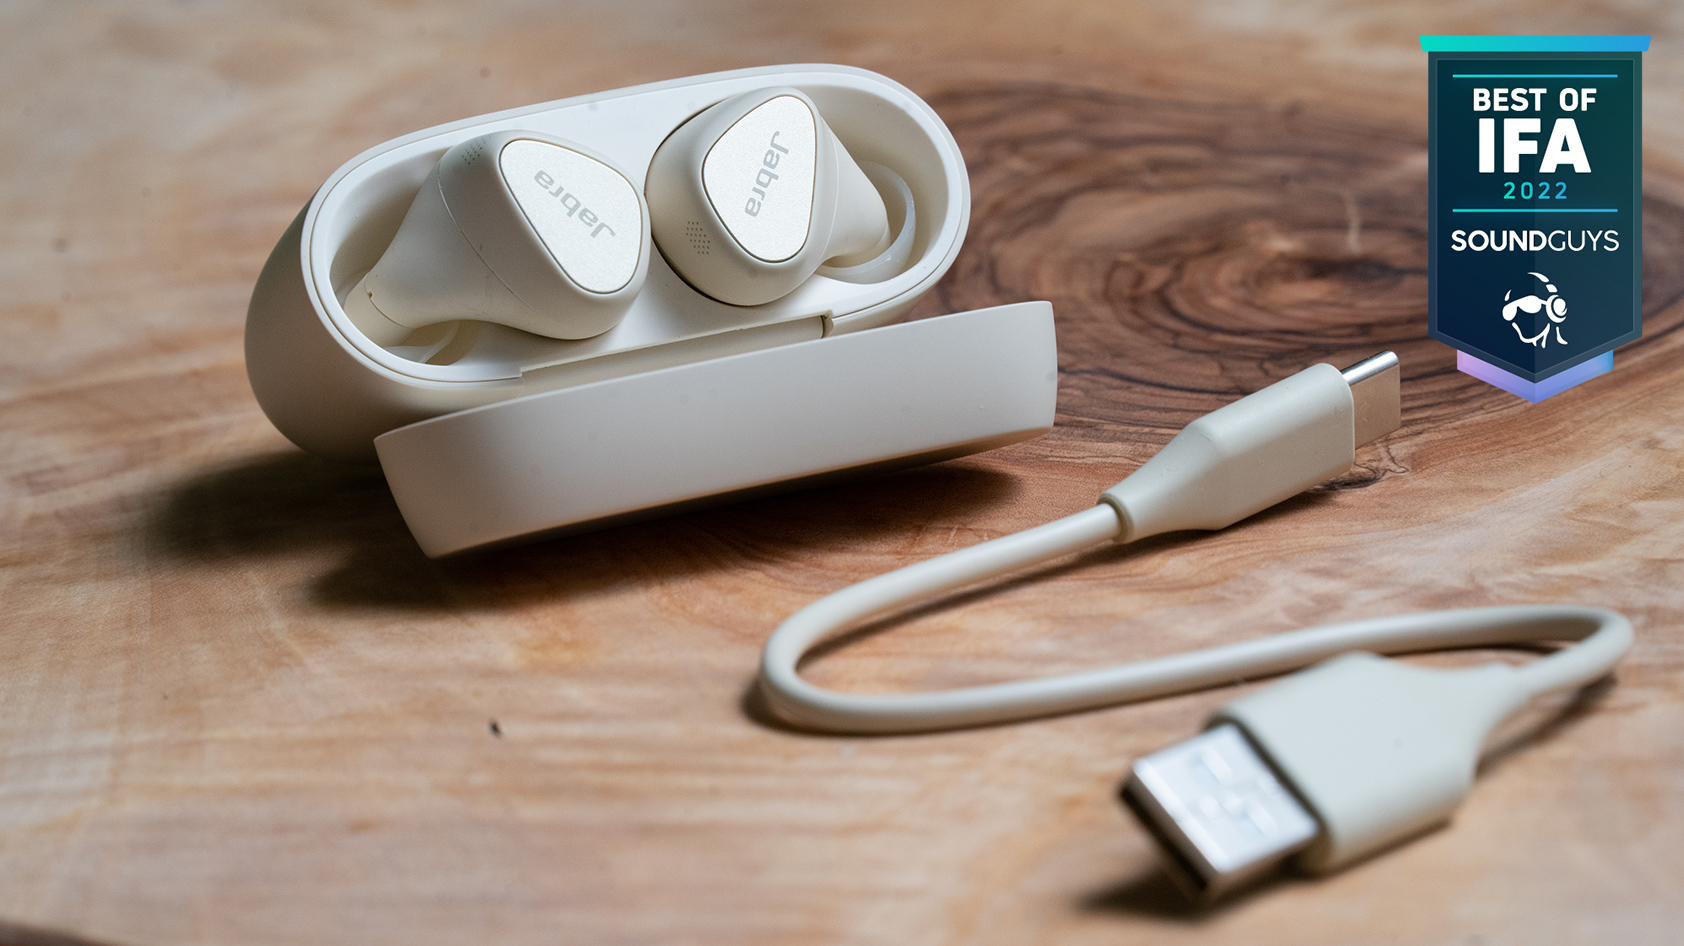 The Jabra Elite 5 true wireless earbuds in white on a wooden surface with the case open.The Jabra Elite 5 true wireless earbuds in white on a wooden surface with the case open.